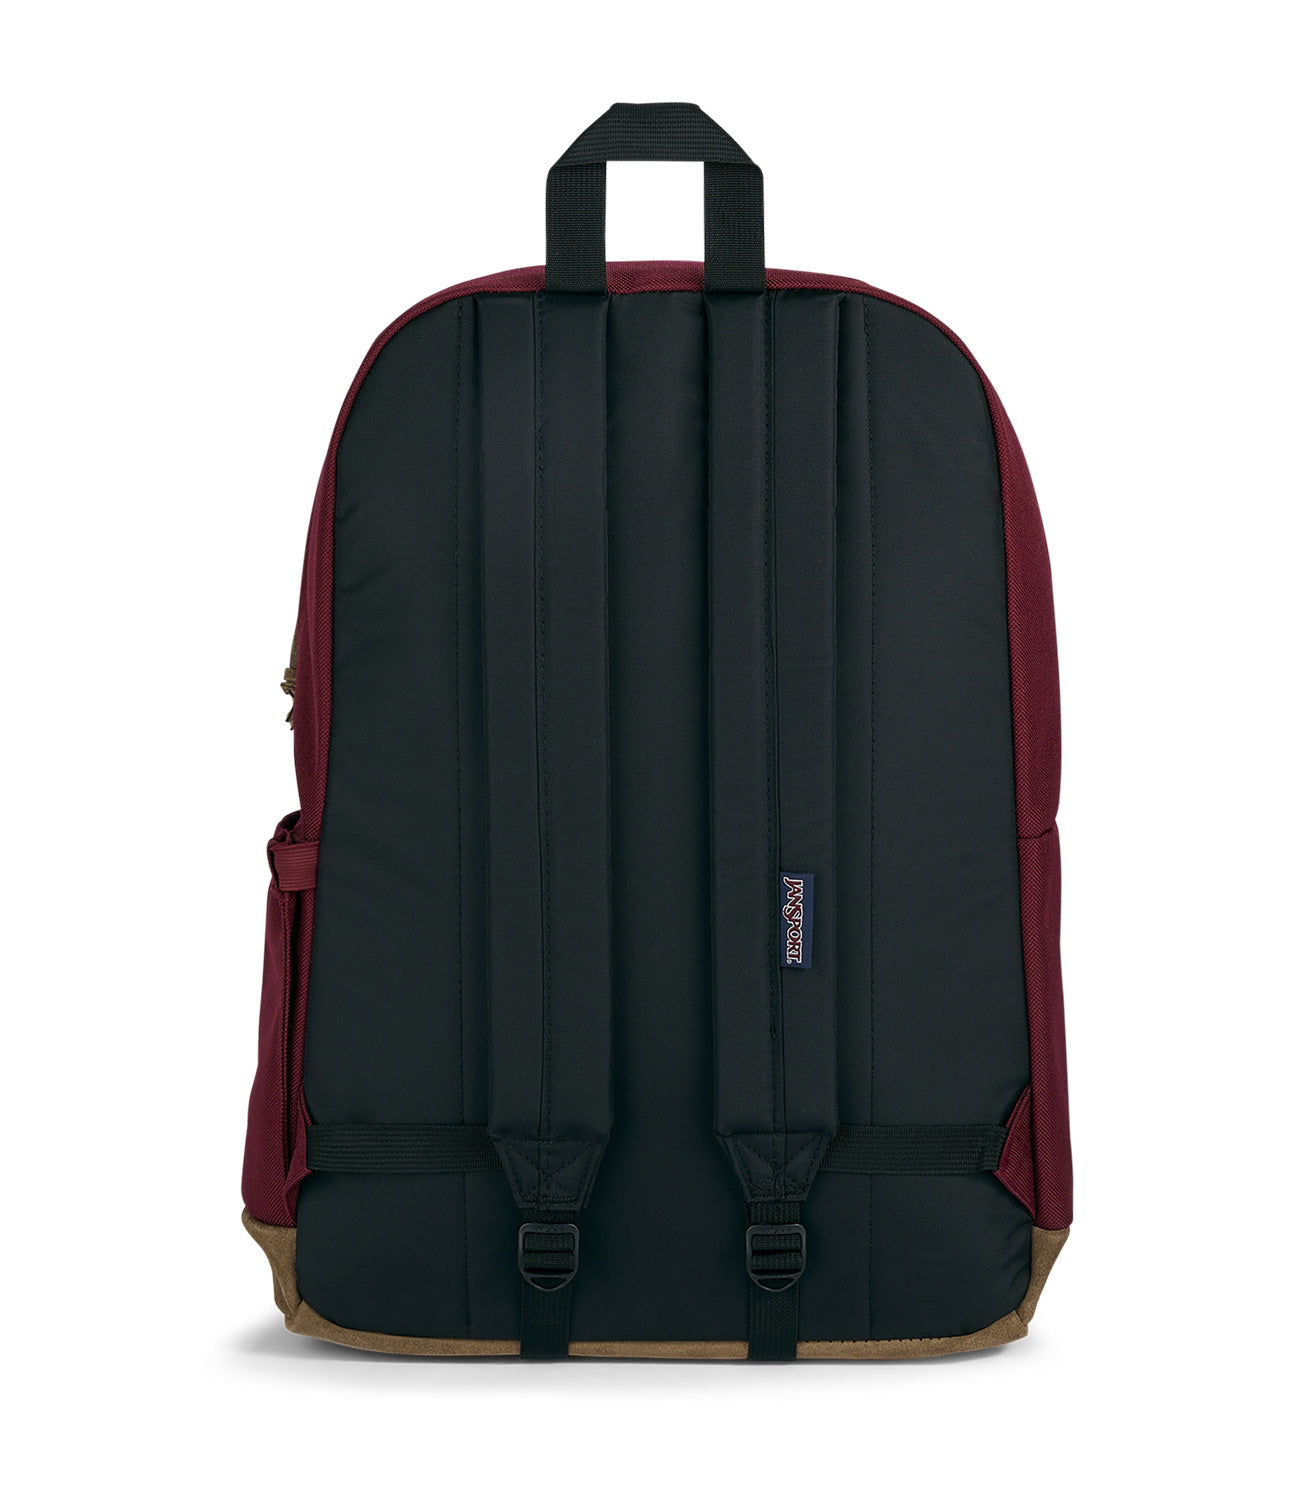 Rightpack Backpack (Russet Red)